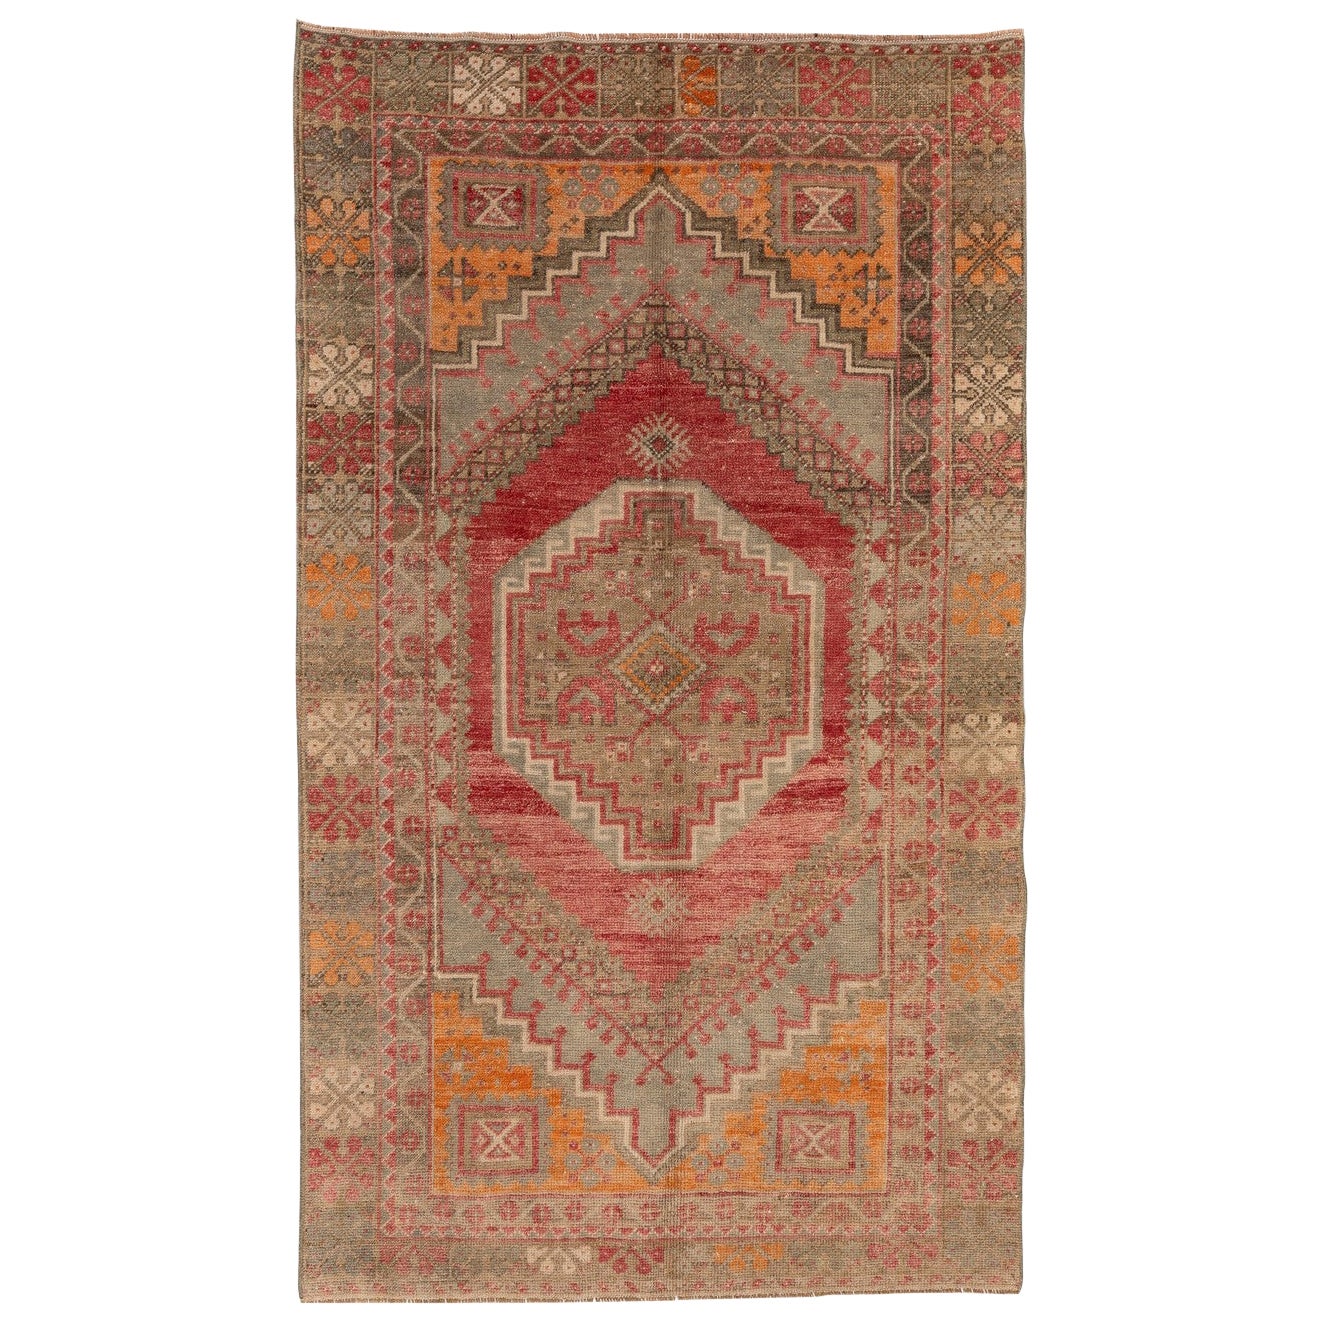 3.6x6 Ft 1950s Turkish Rug with Soft Wool Pile in Warm Red, Orange Gray Colors For Sale